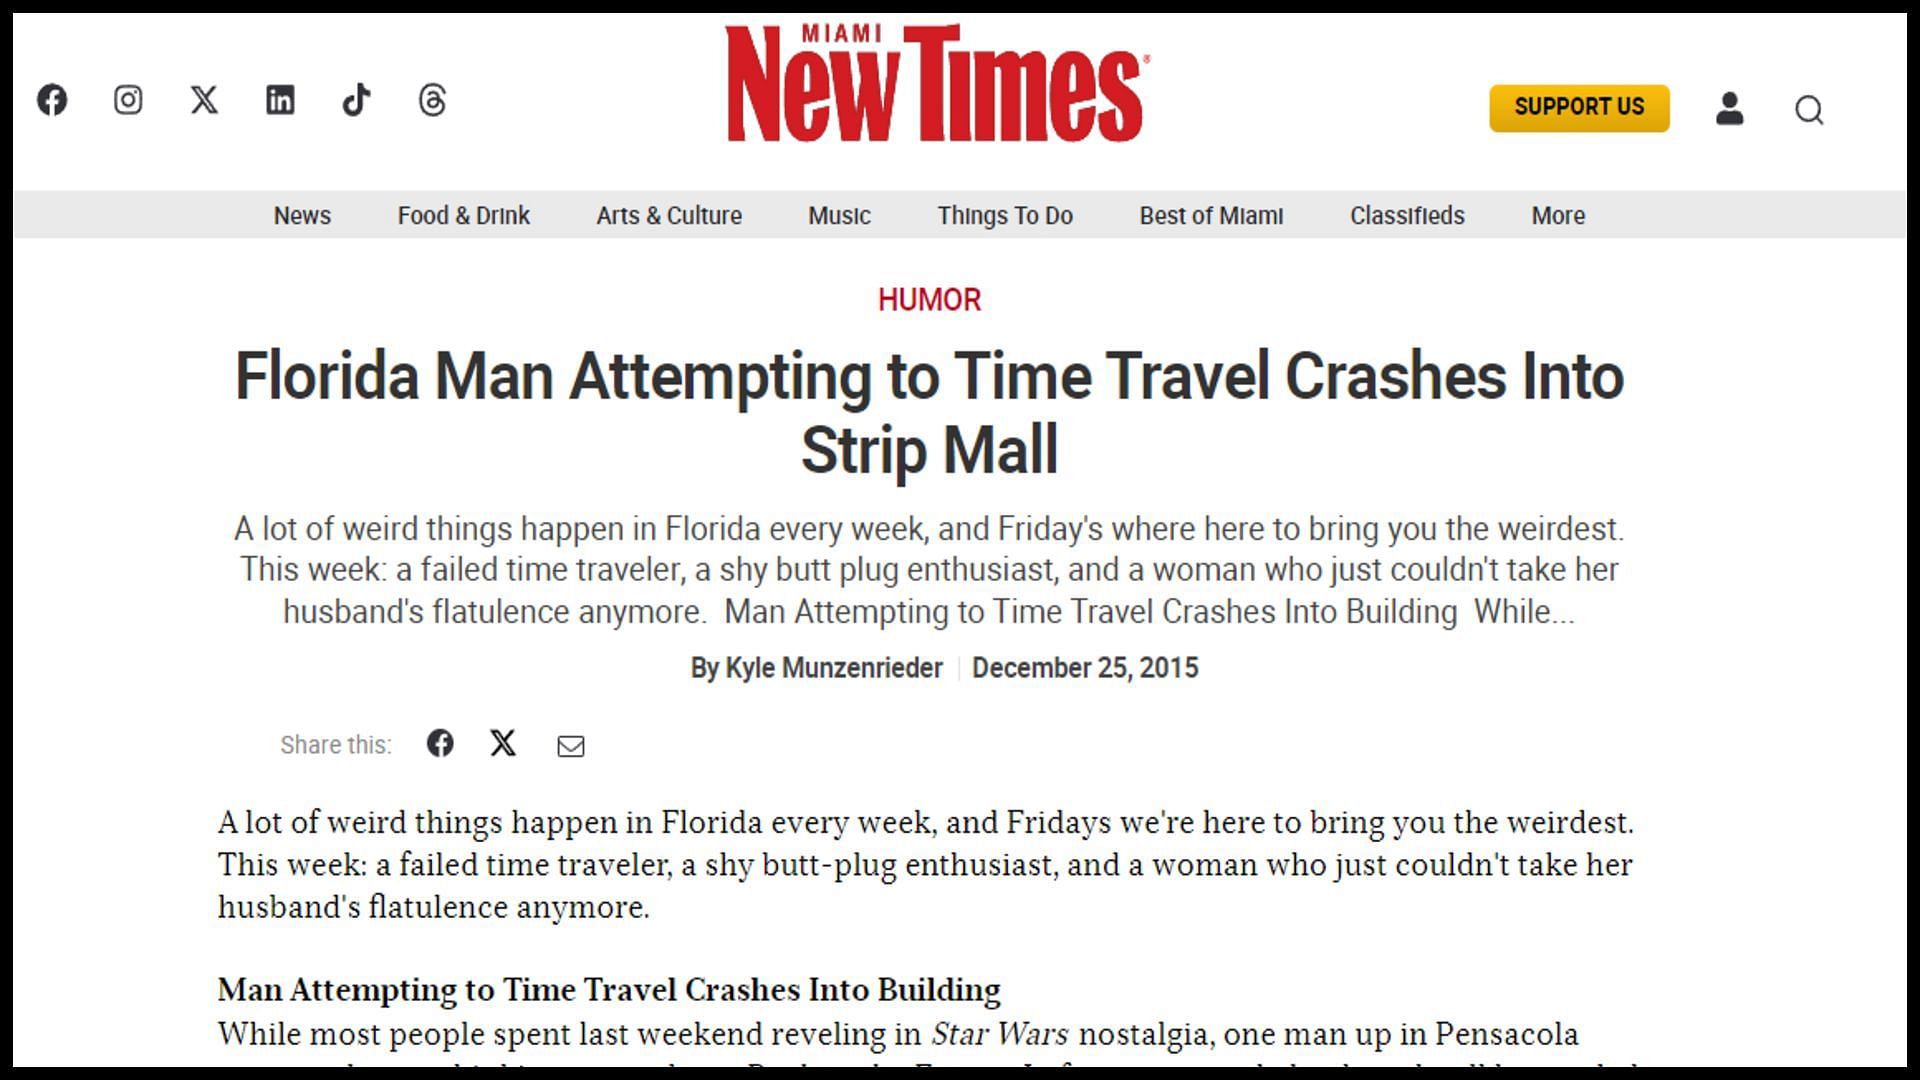 A screenshot of the news from a news source (Image via Miami New Times)